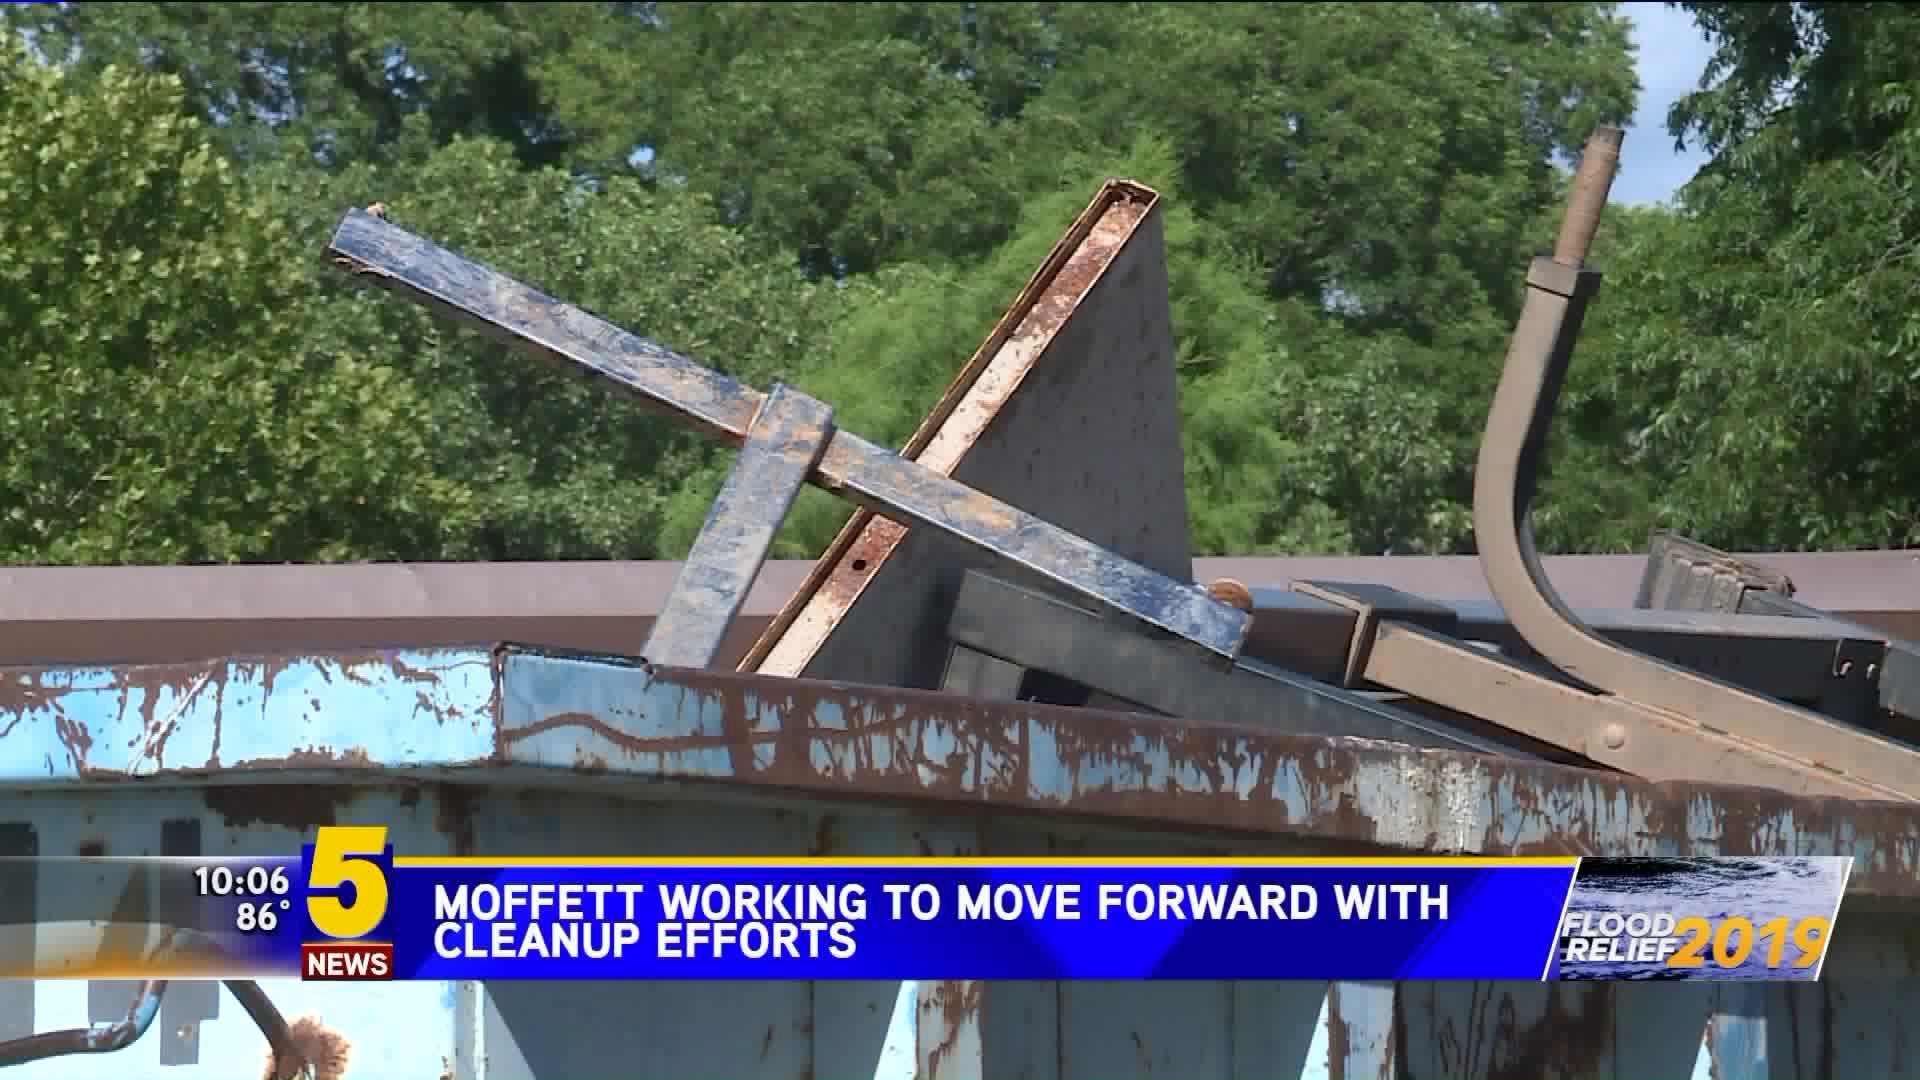 Moffett Working To Move Forward With Cleanup Efforts